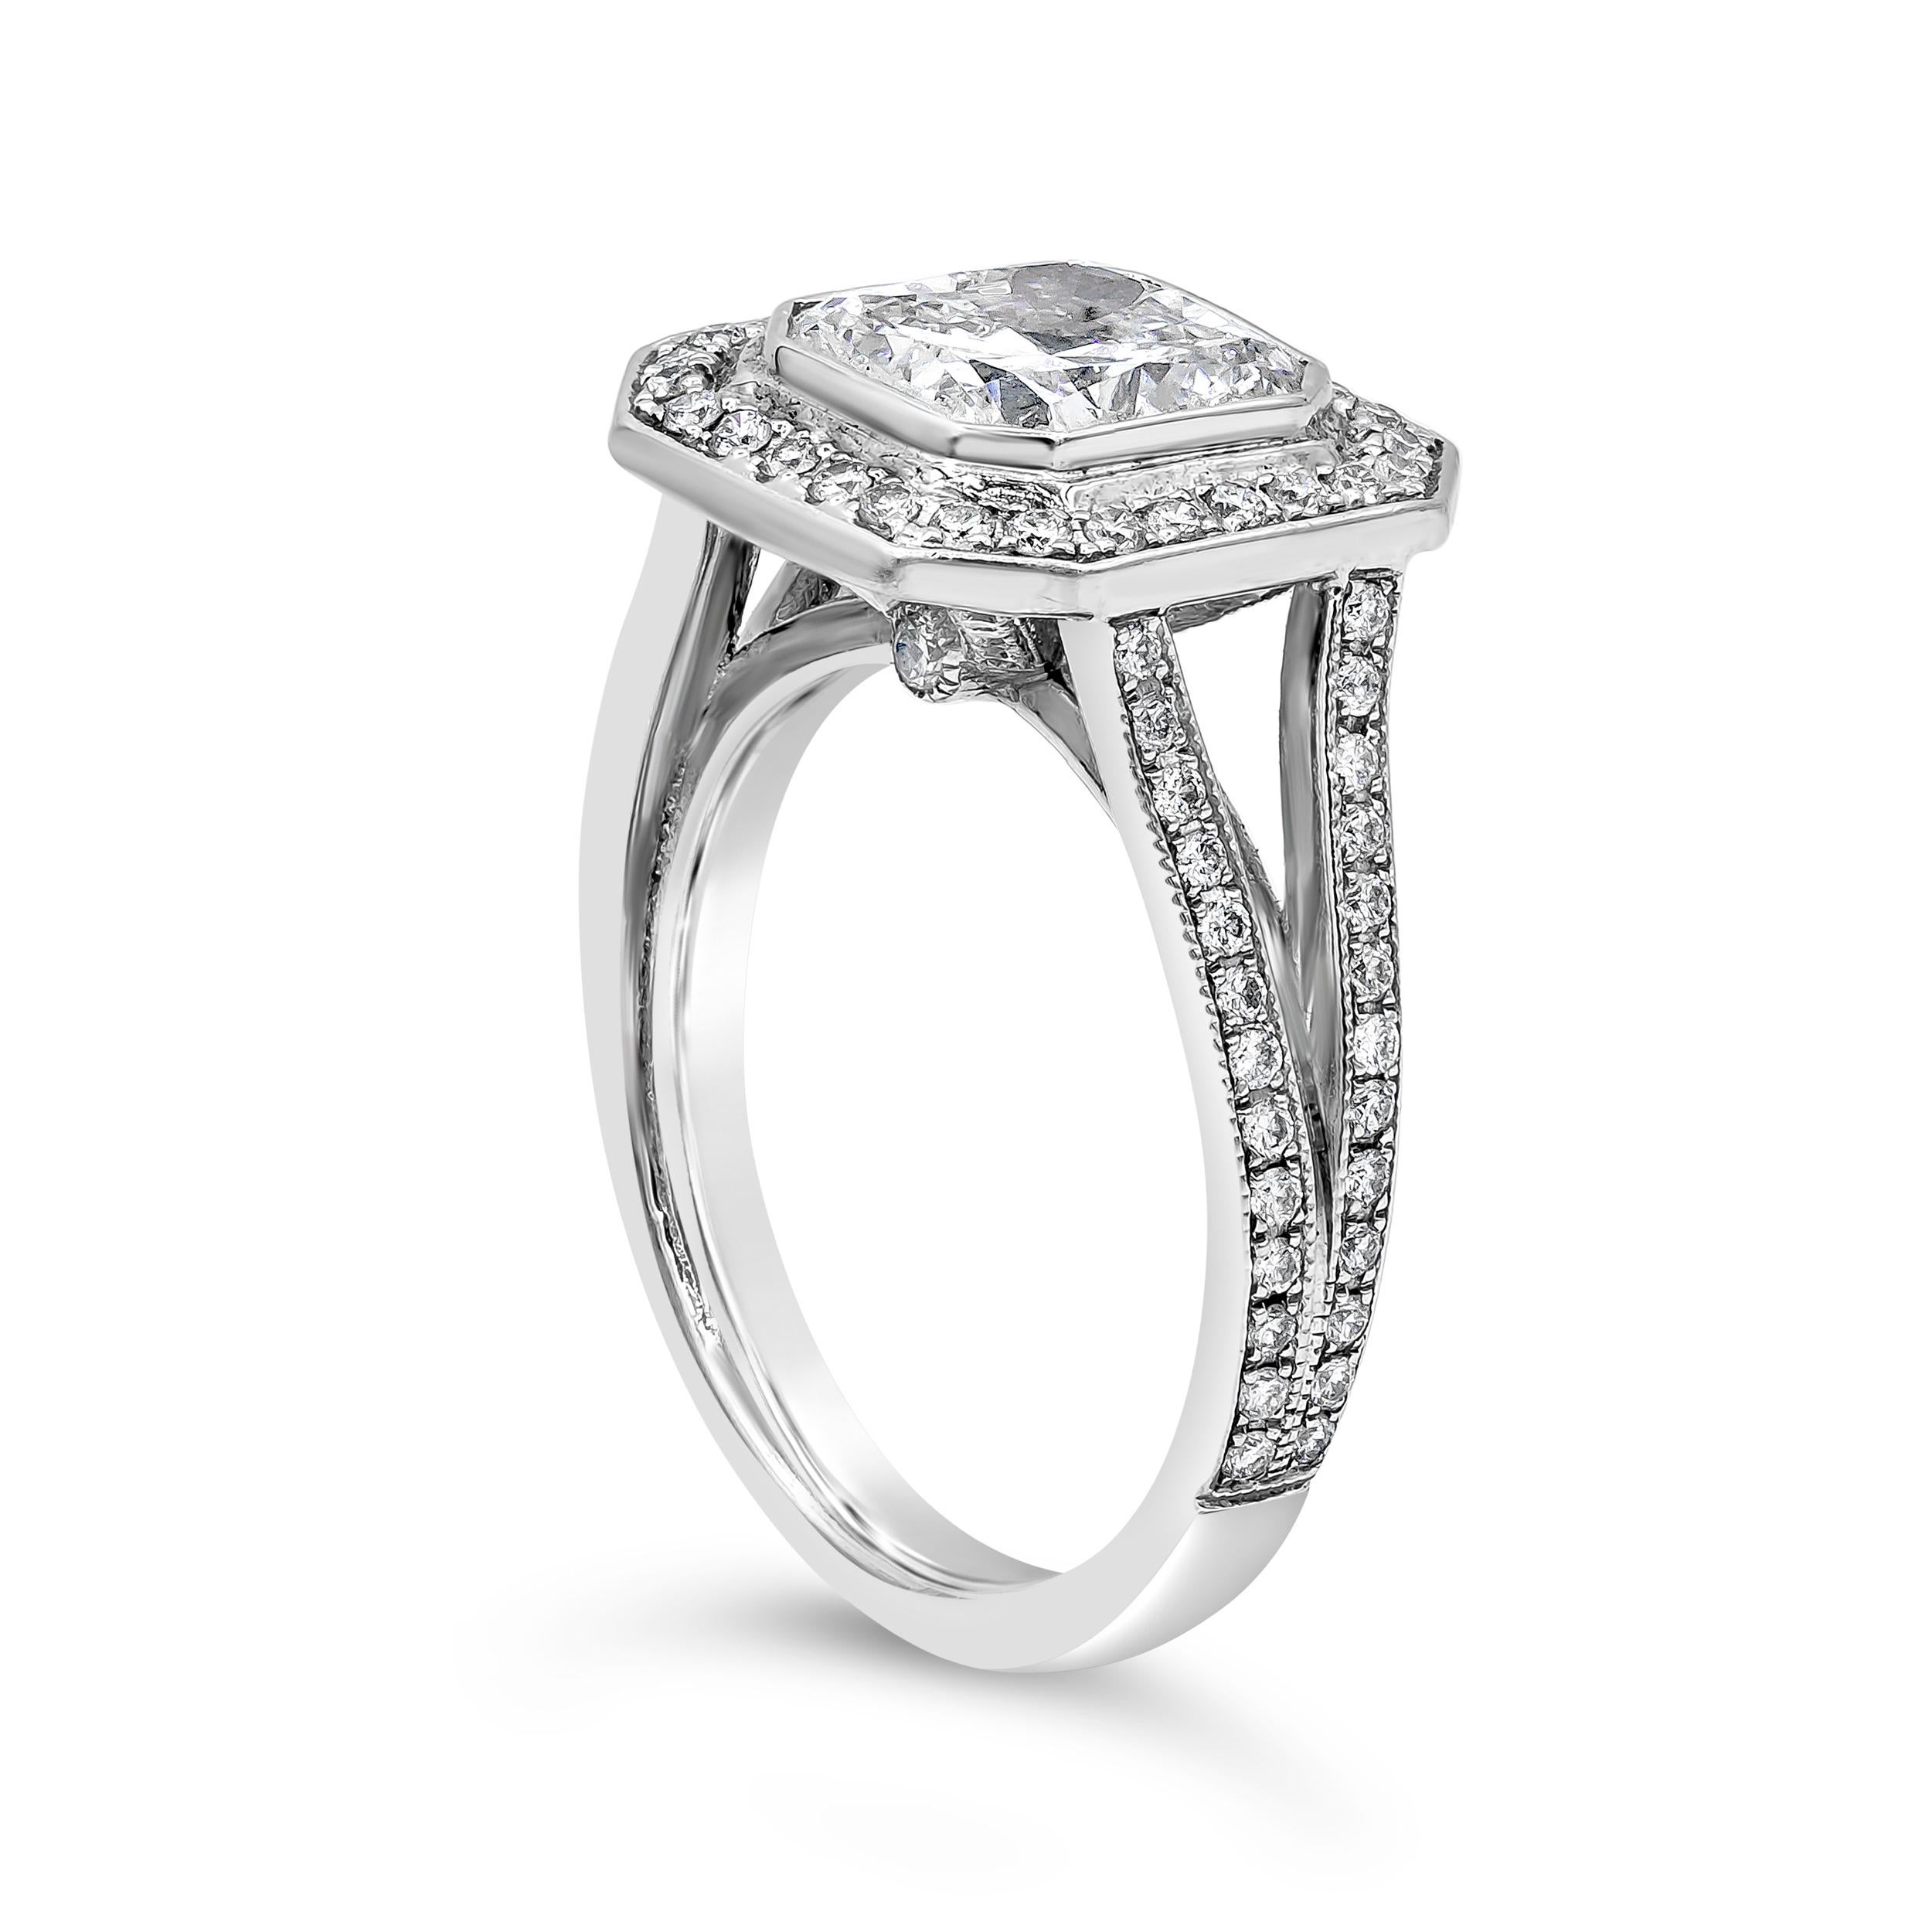 This antique style ring features a GIA Certified 2.54 carat radiant cut diamond I Color and VS2 in Clarity. Surrounded by a single row of round brilliant diamonds accented with brilliant round diamonds down the shank. Accent diamonds weighs 0.51